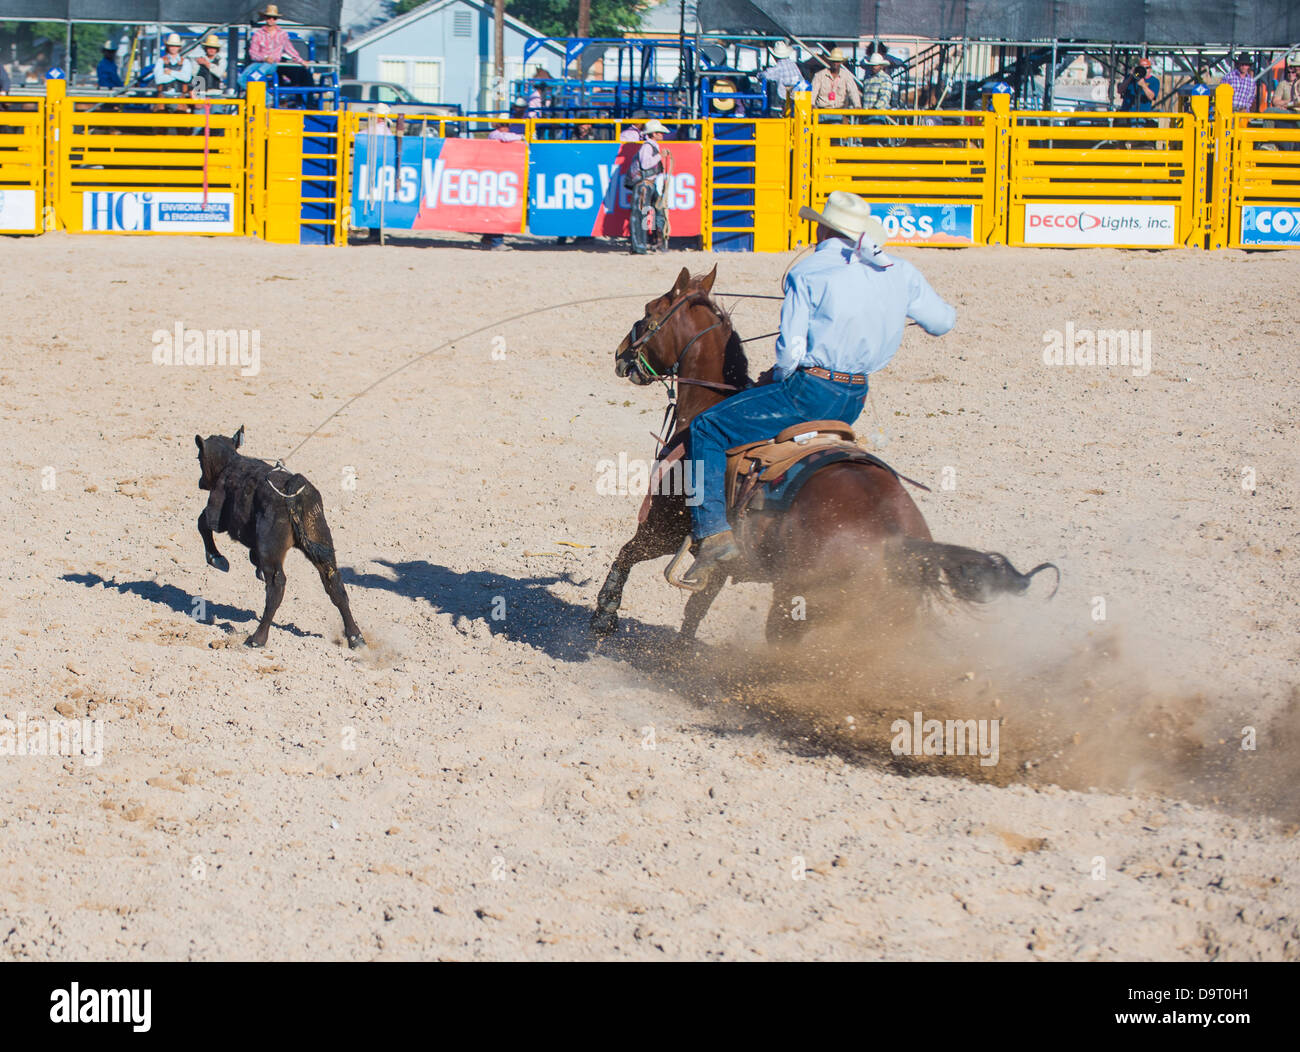 Cowboy Participant in a Calf roping Competition at the Helldorado Days Professional Rodeo in Las Vegas Stock Photo